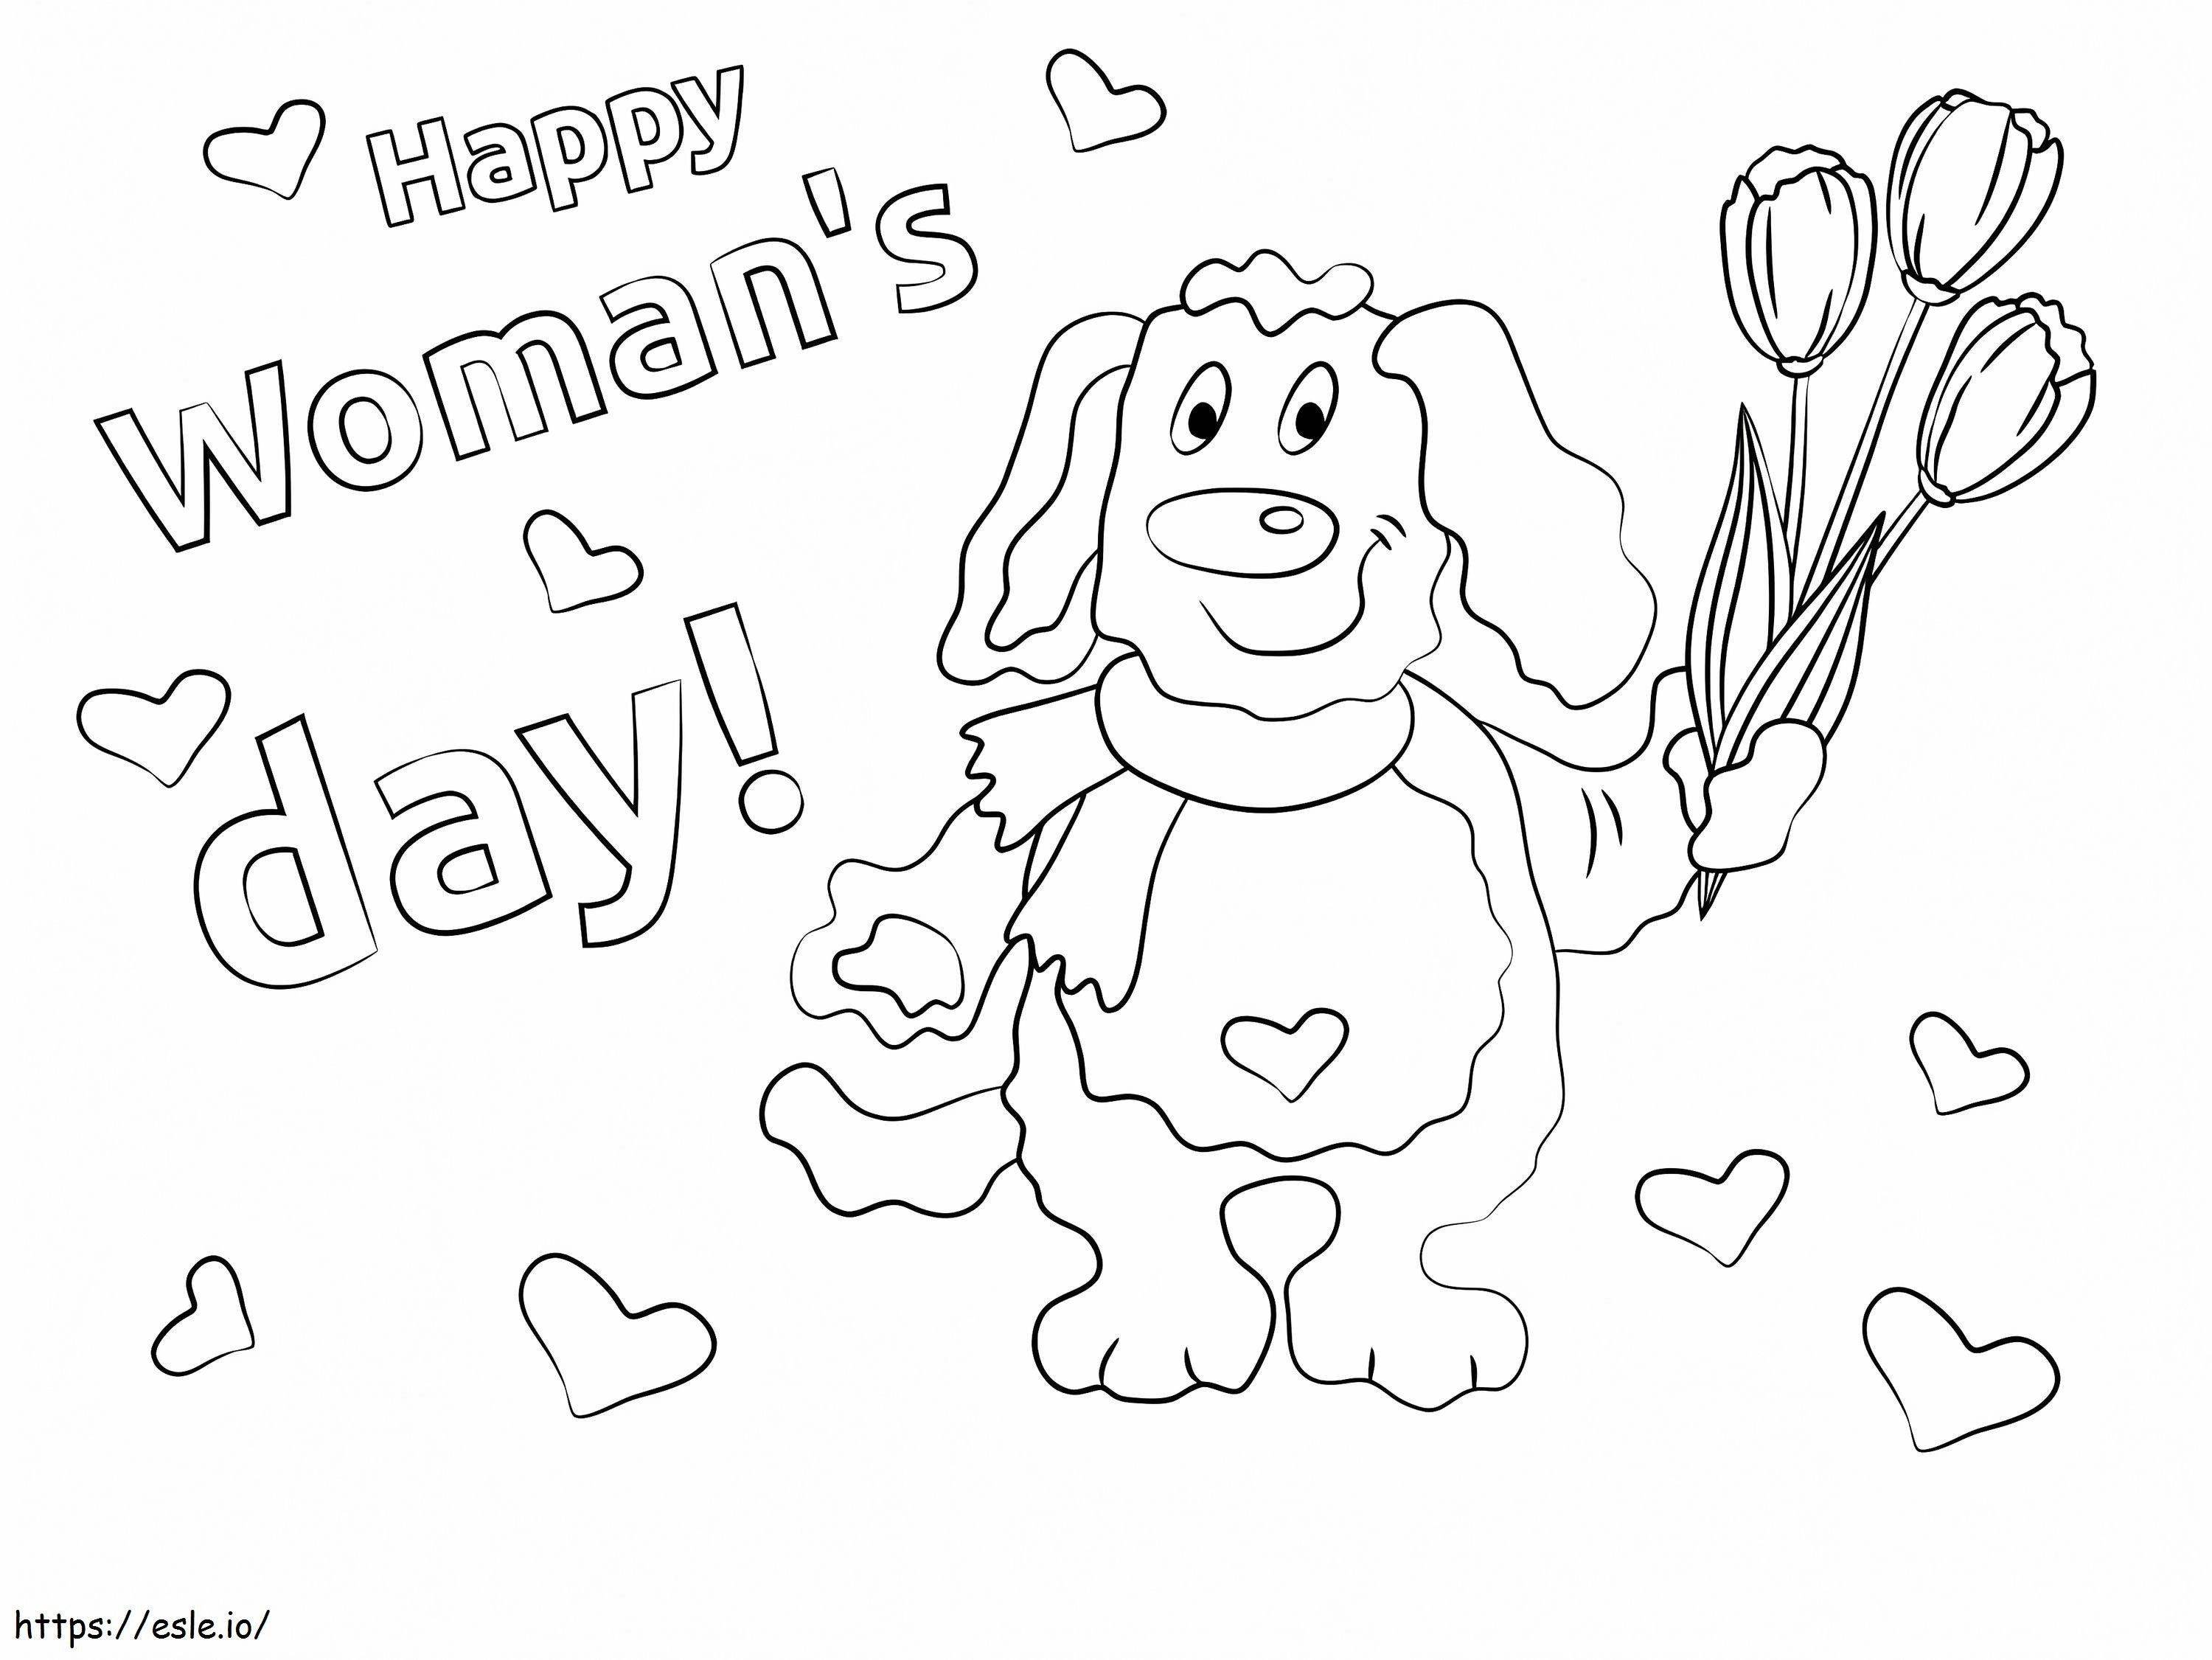 Happy Womens Day 2 coloring page